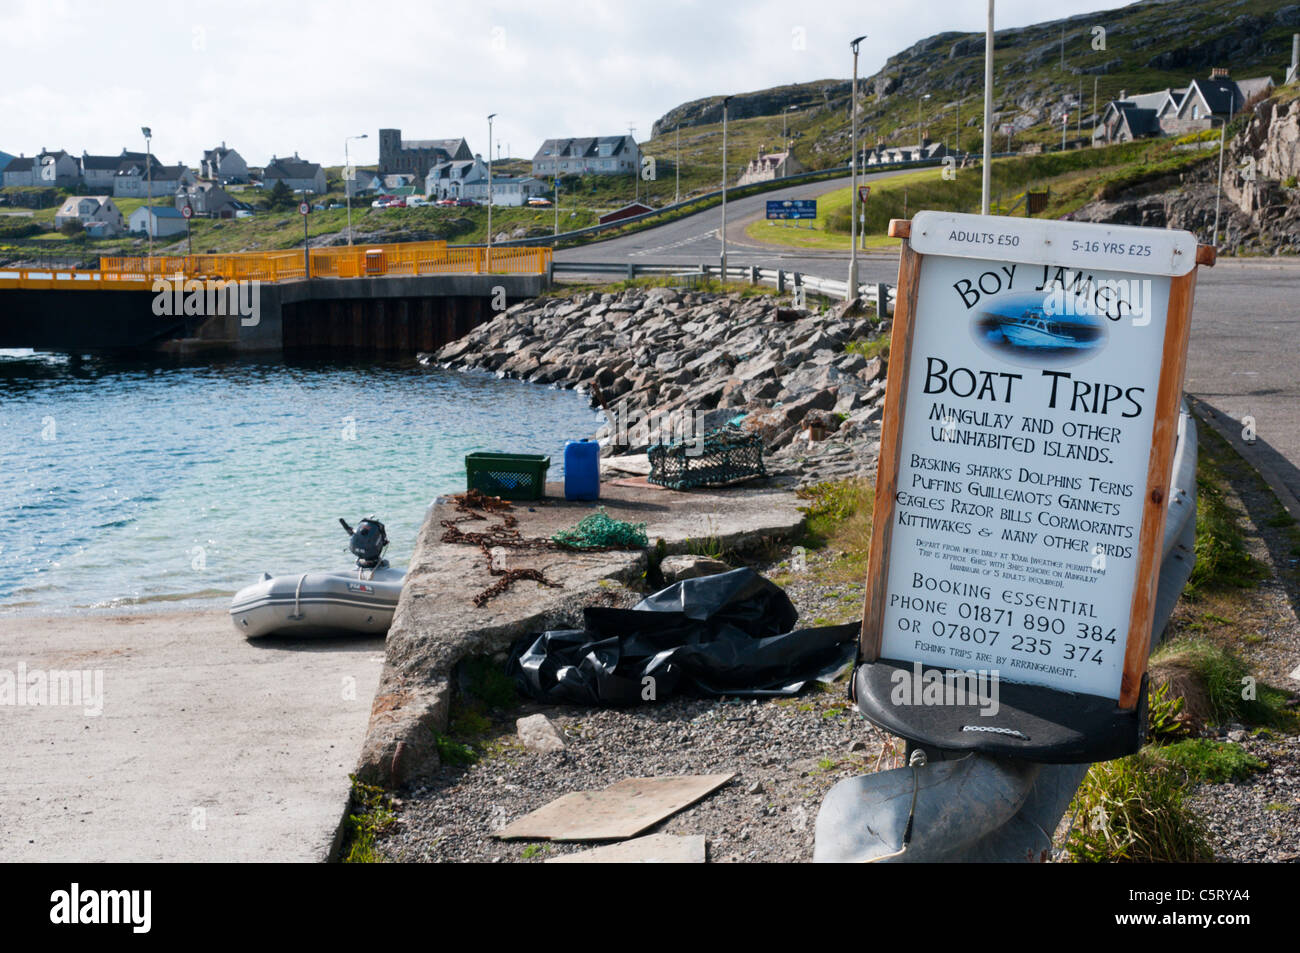 A sign at Castlebay harbour on Barra for nature watching boat trips to some of the smaller islands of the Outer Hebrides Stock Photo